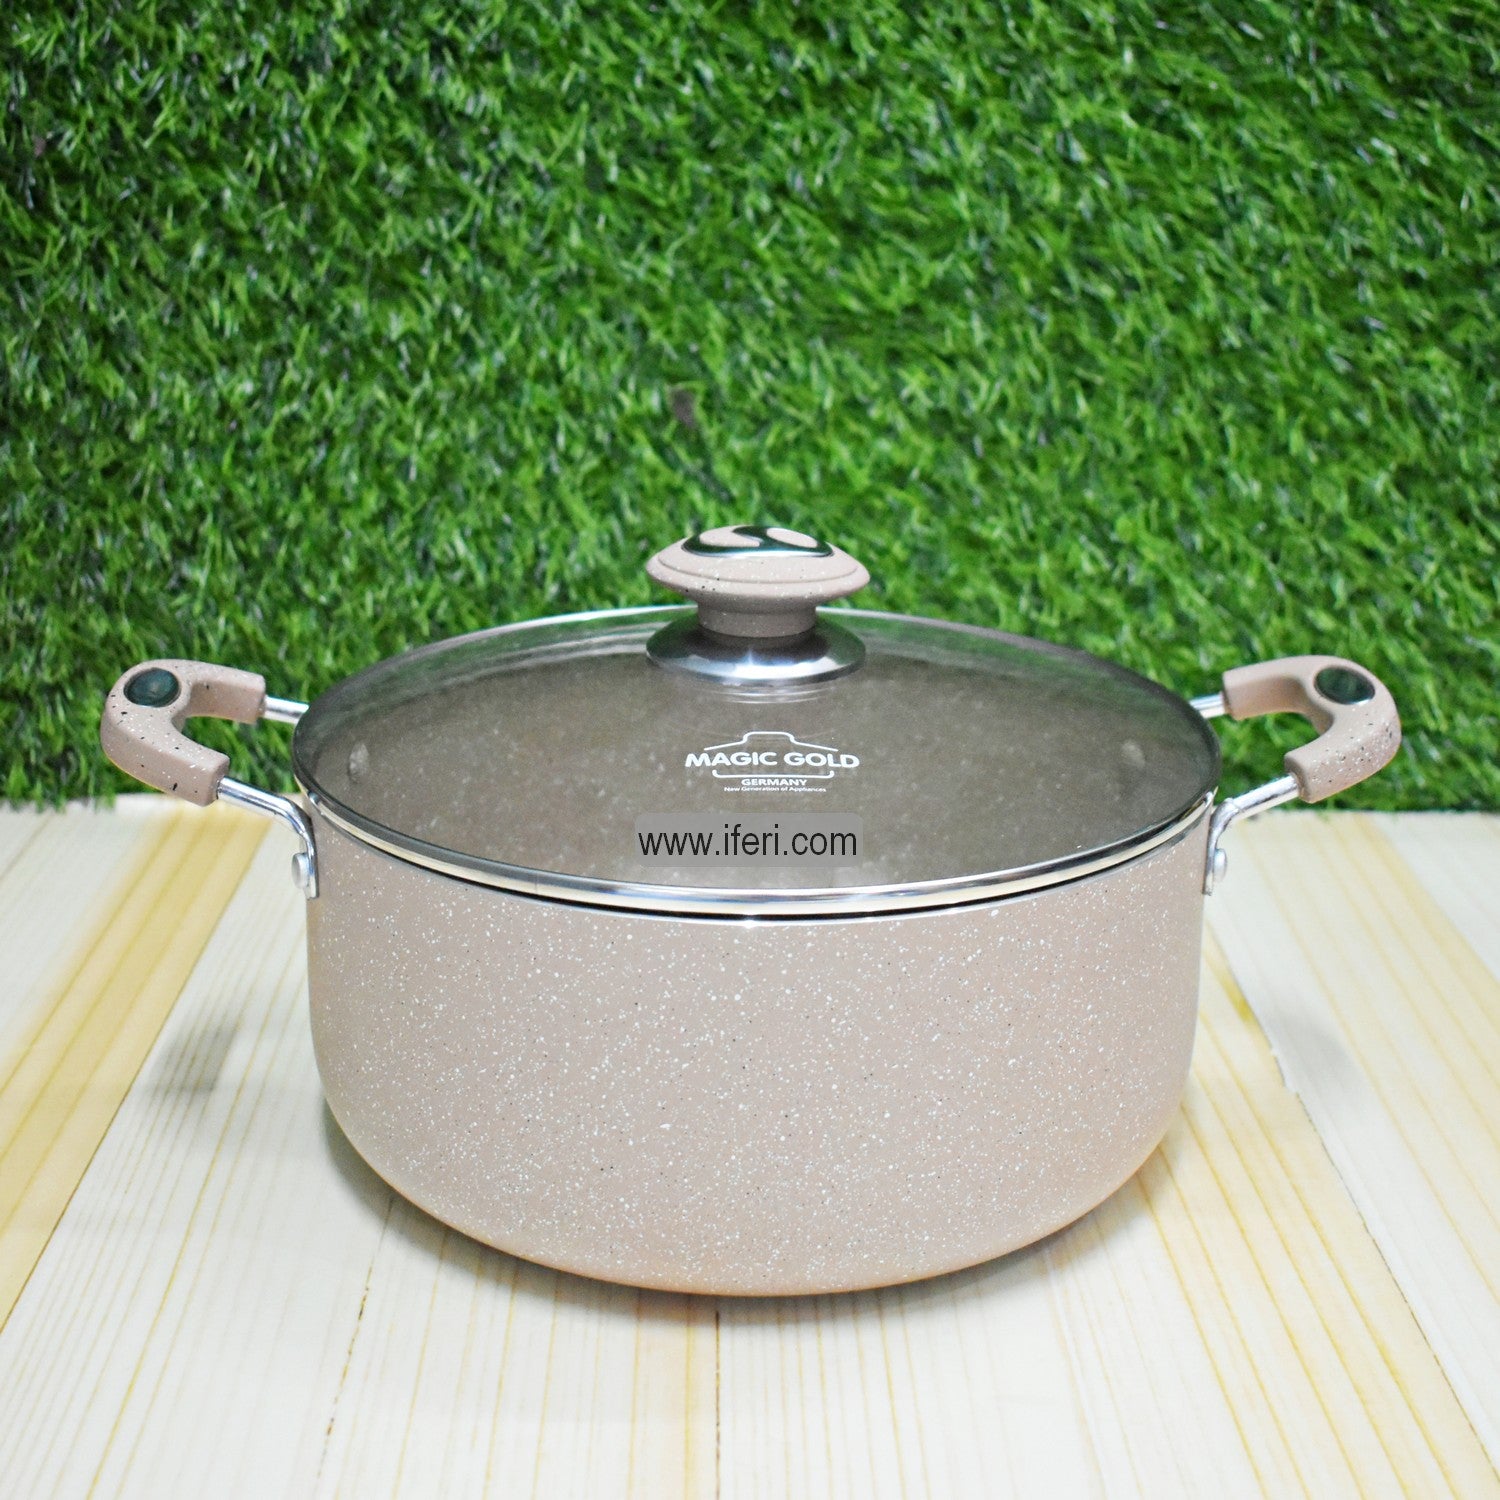 26 cm Magic Gold Non-stick Cookware with Lid TG00094